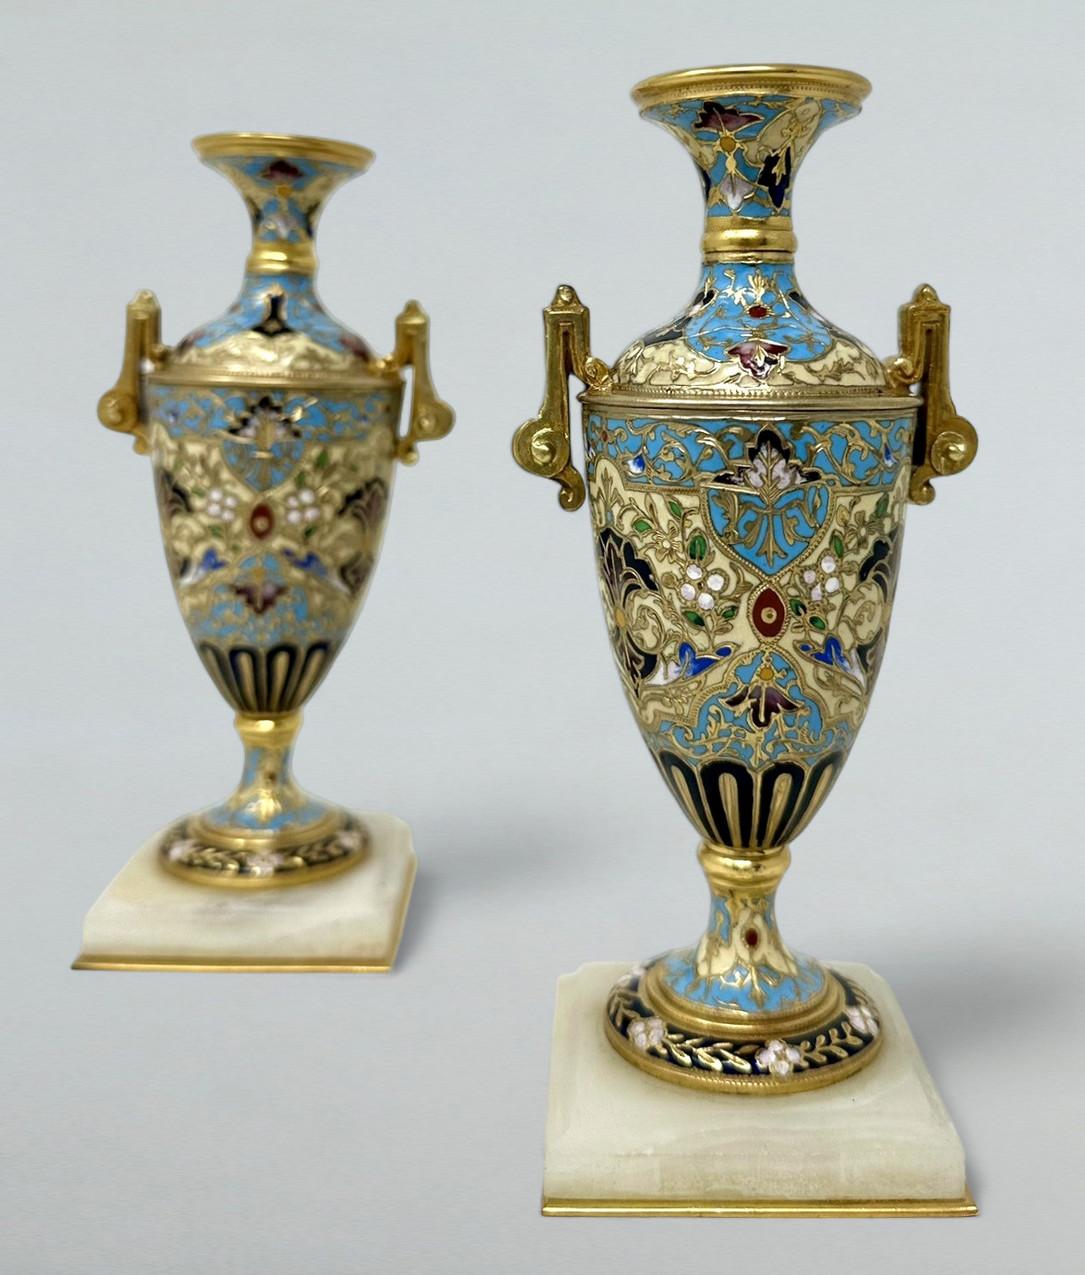 An Exceptionally Stylish Pair of French Bronze Dore and Champleve Cloisonne twin handle Vases of outstanding quality and compact size. Third quarter of the Nineteenth Century. 

This magnificent pair of Vases are wrought from Gilt Ormolu and